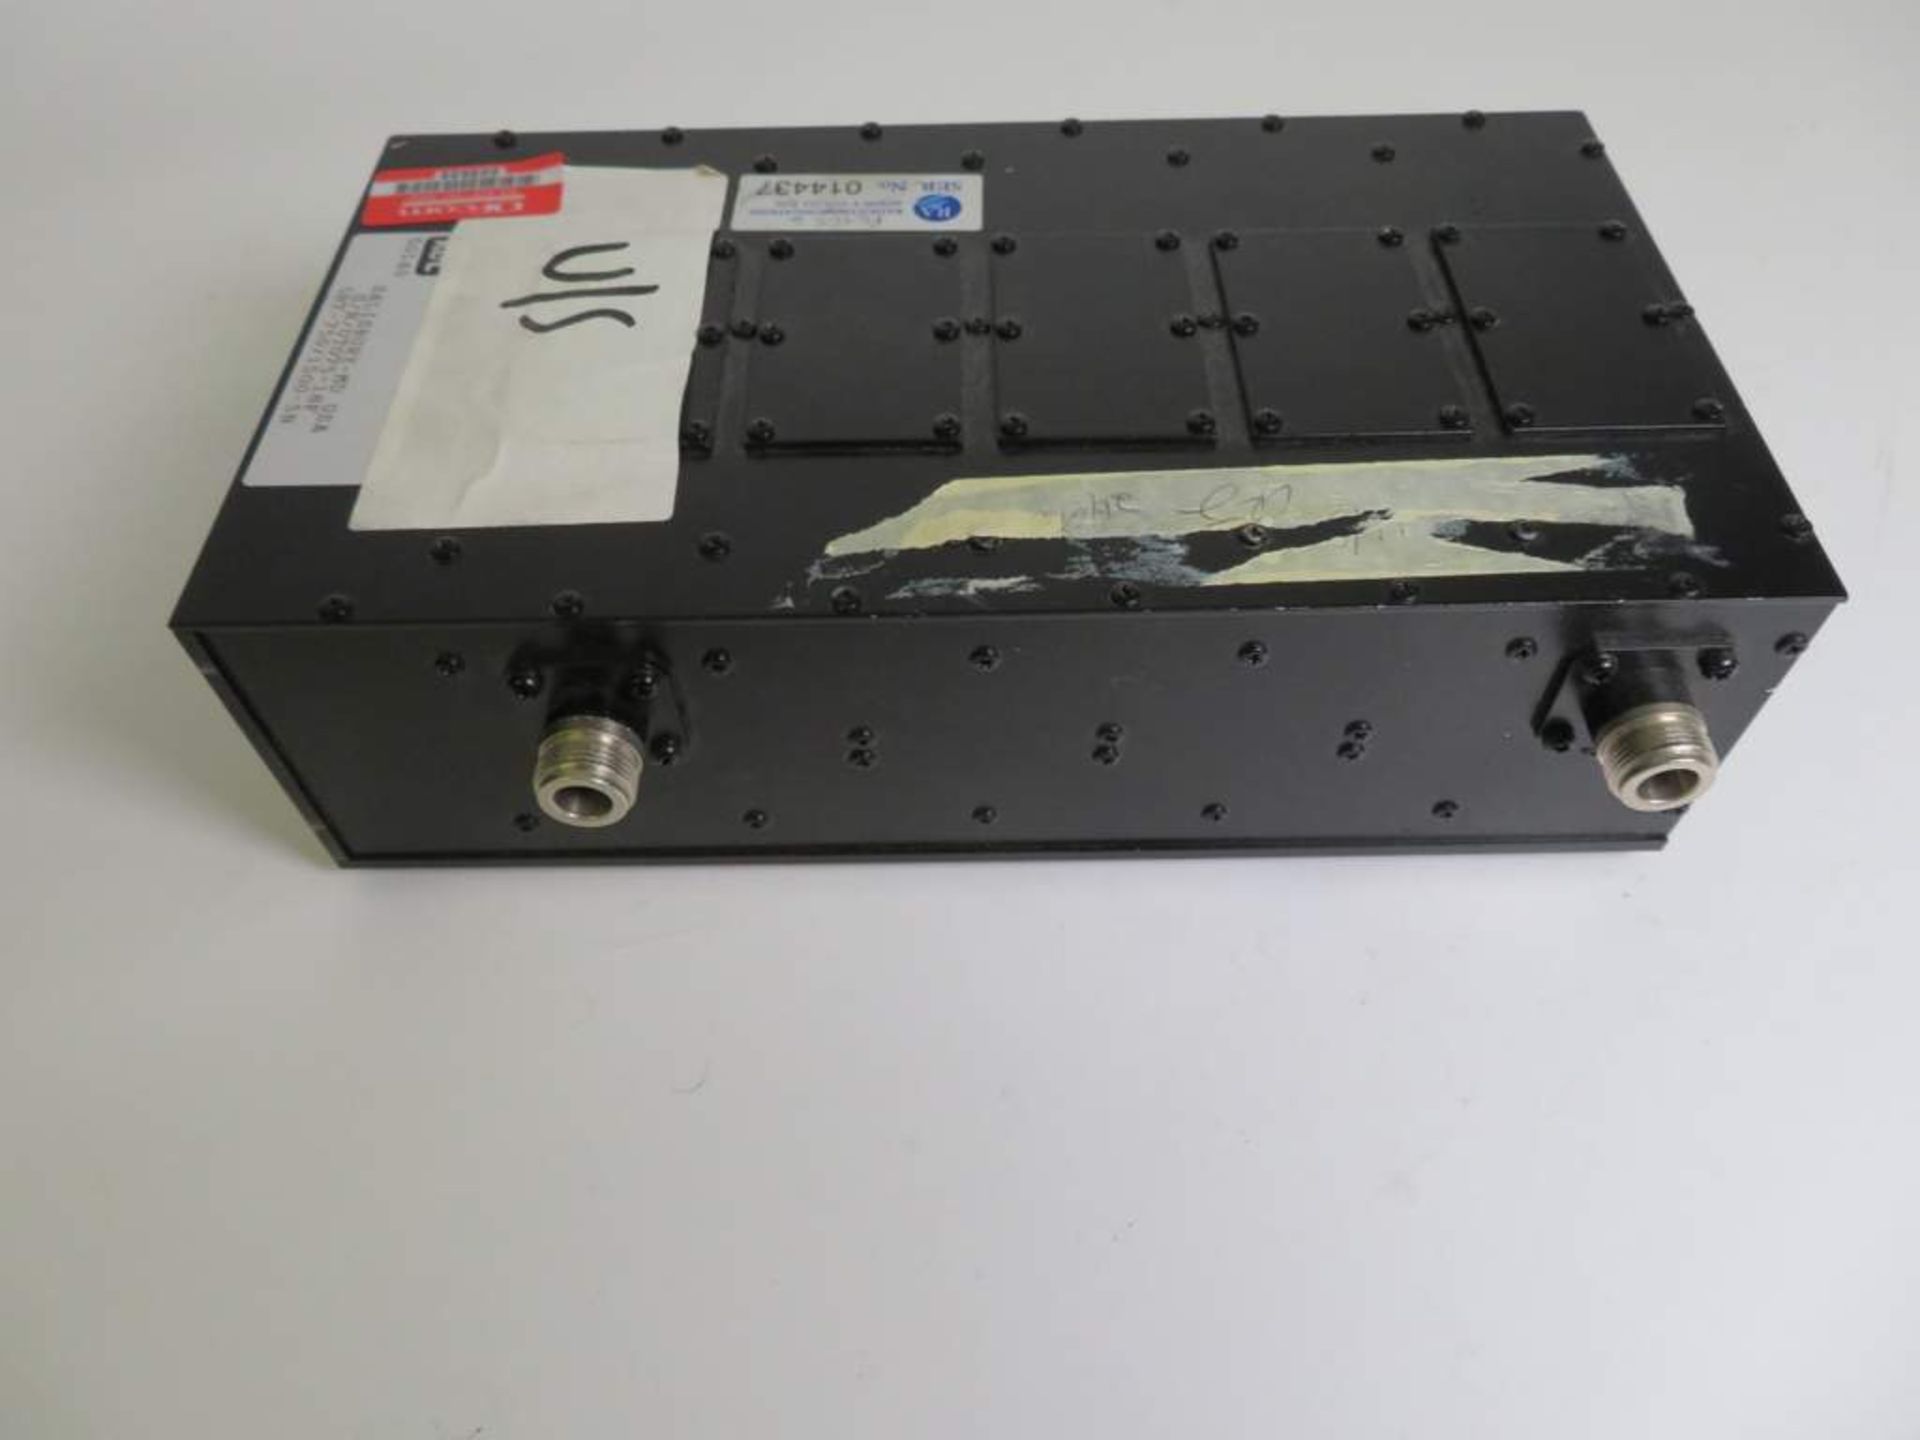 K&L 5BT-750/1500-5N Tunable Bandpass Filter US - Image 4 of 4